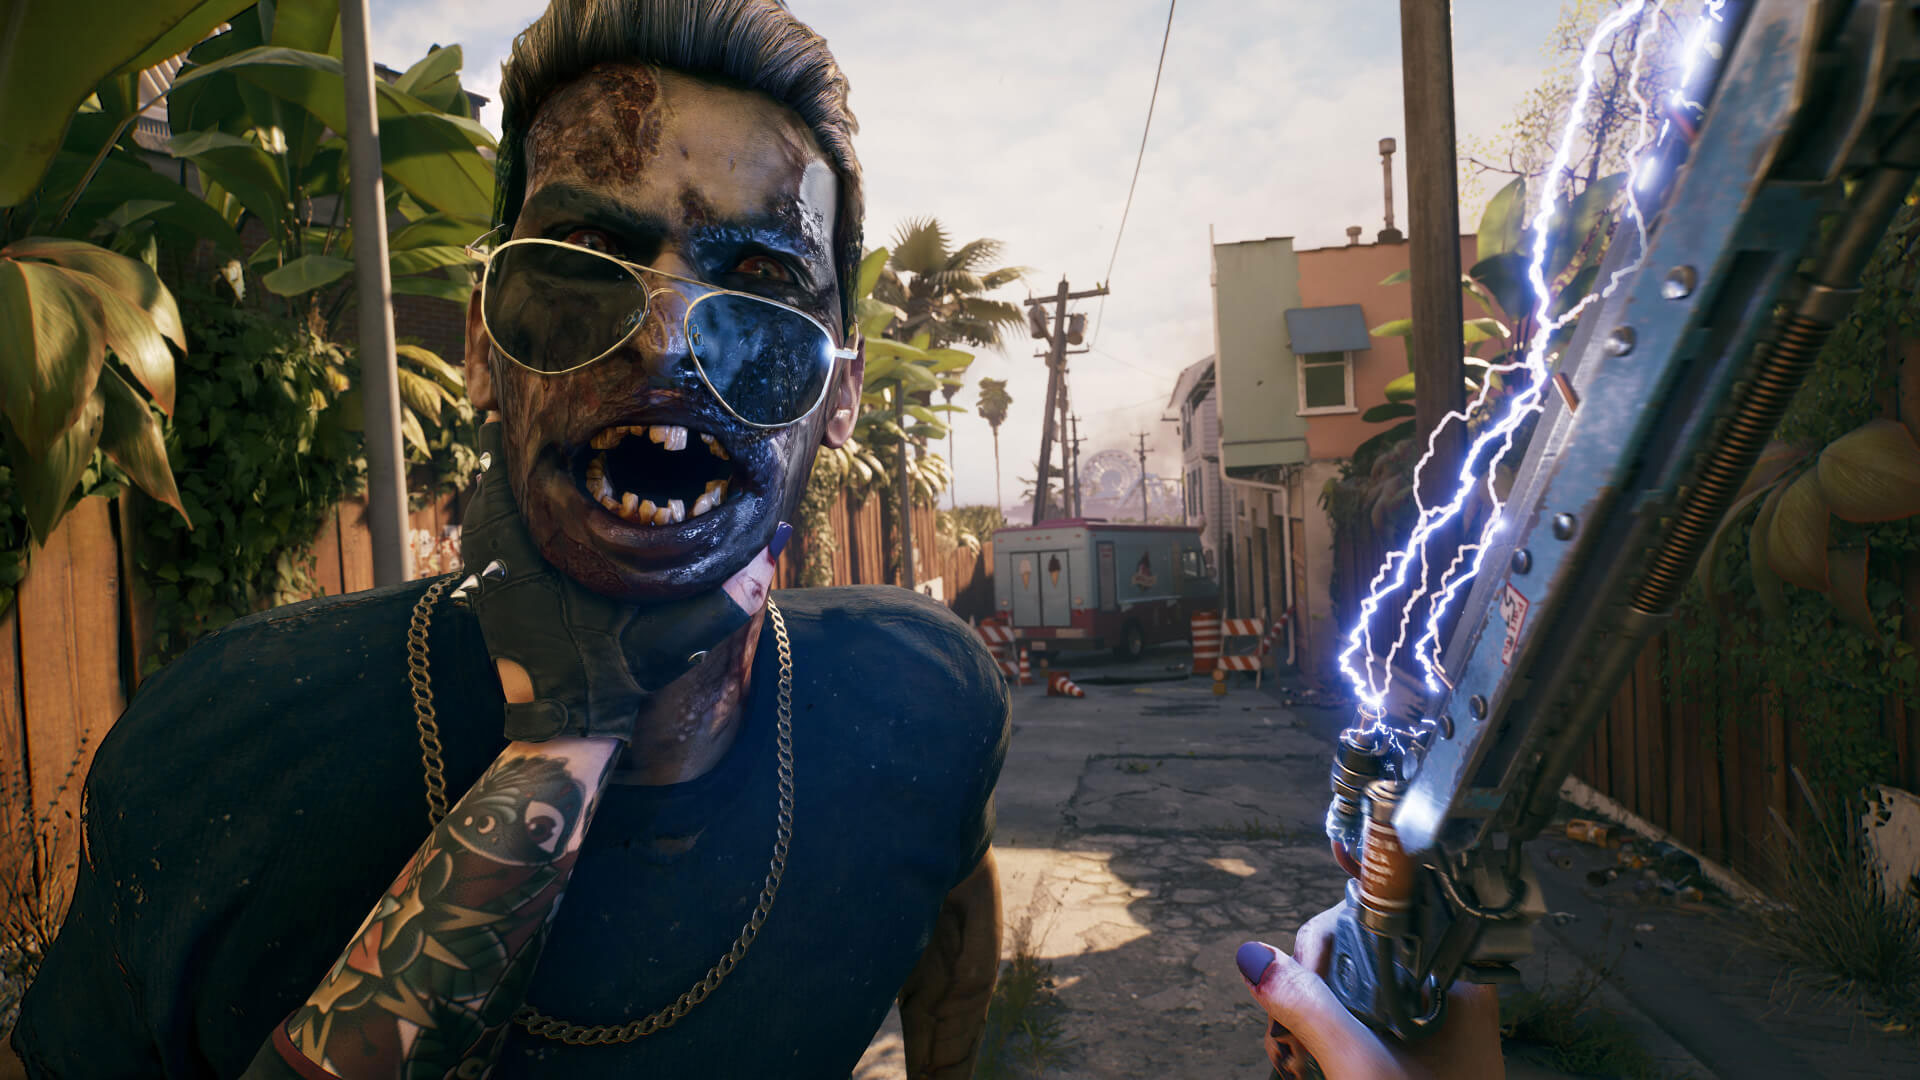 Dead Island 2 Gameplay Trailer Shows Off Weapons, Enemies, And